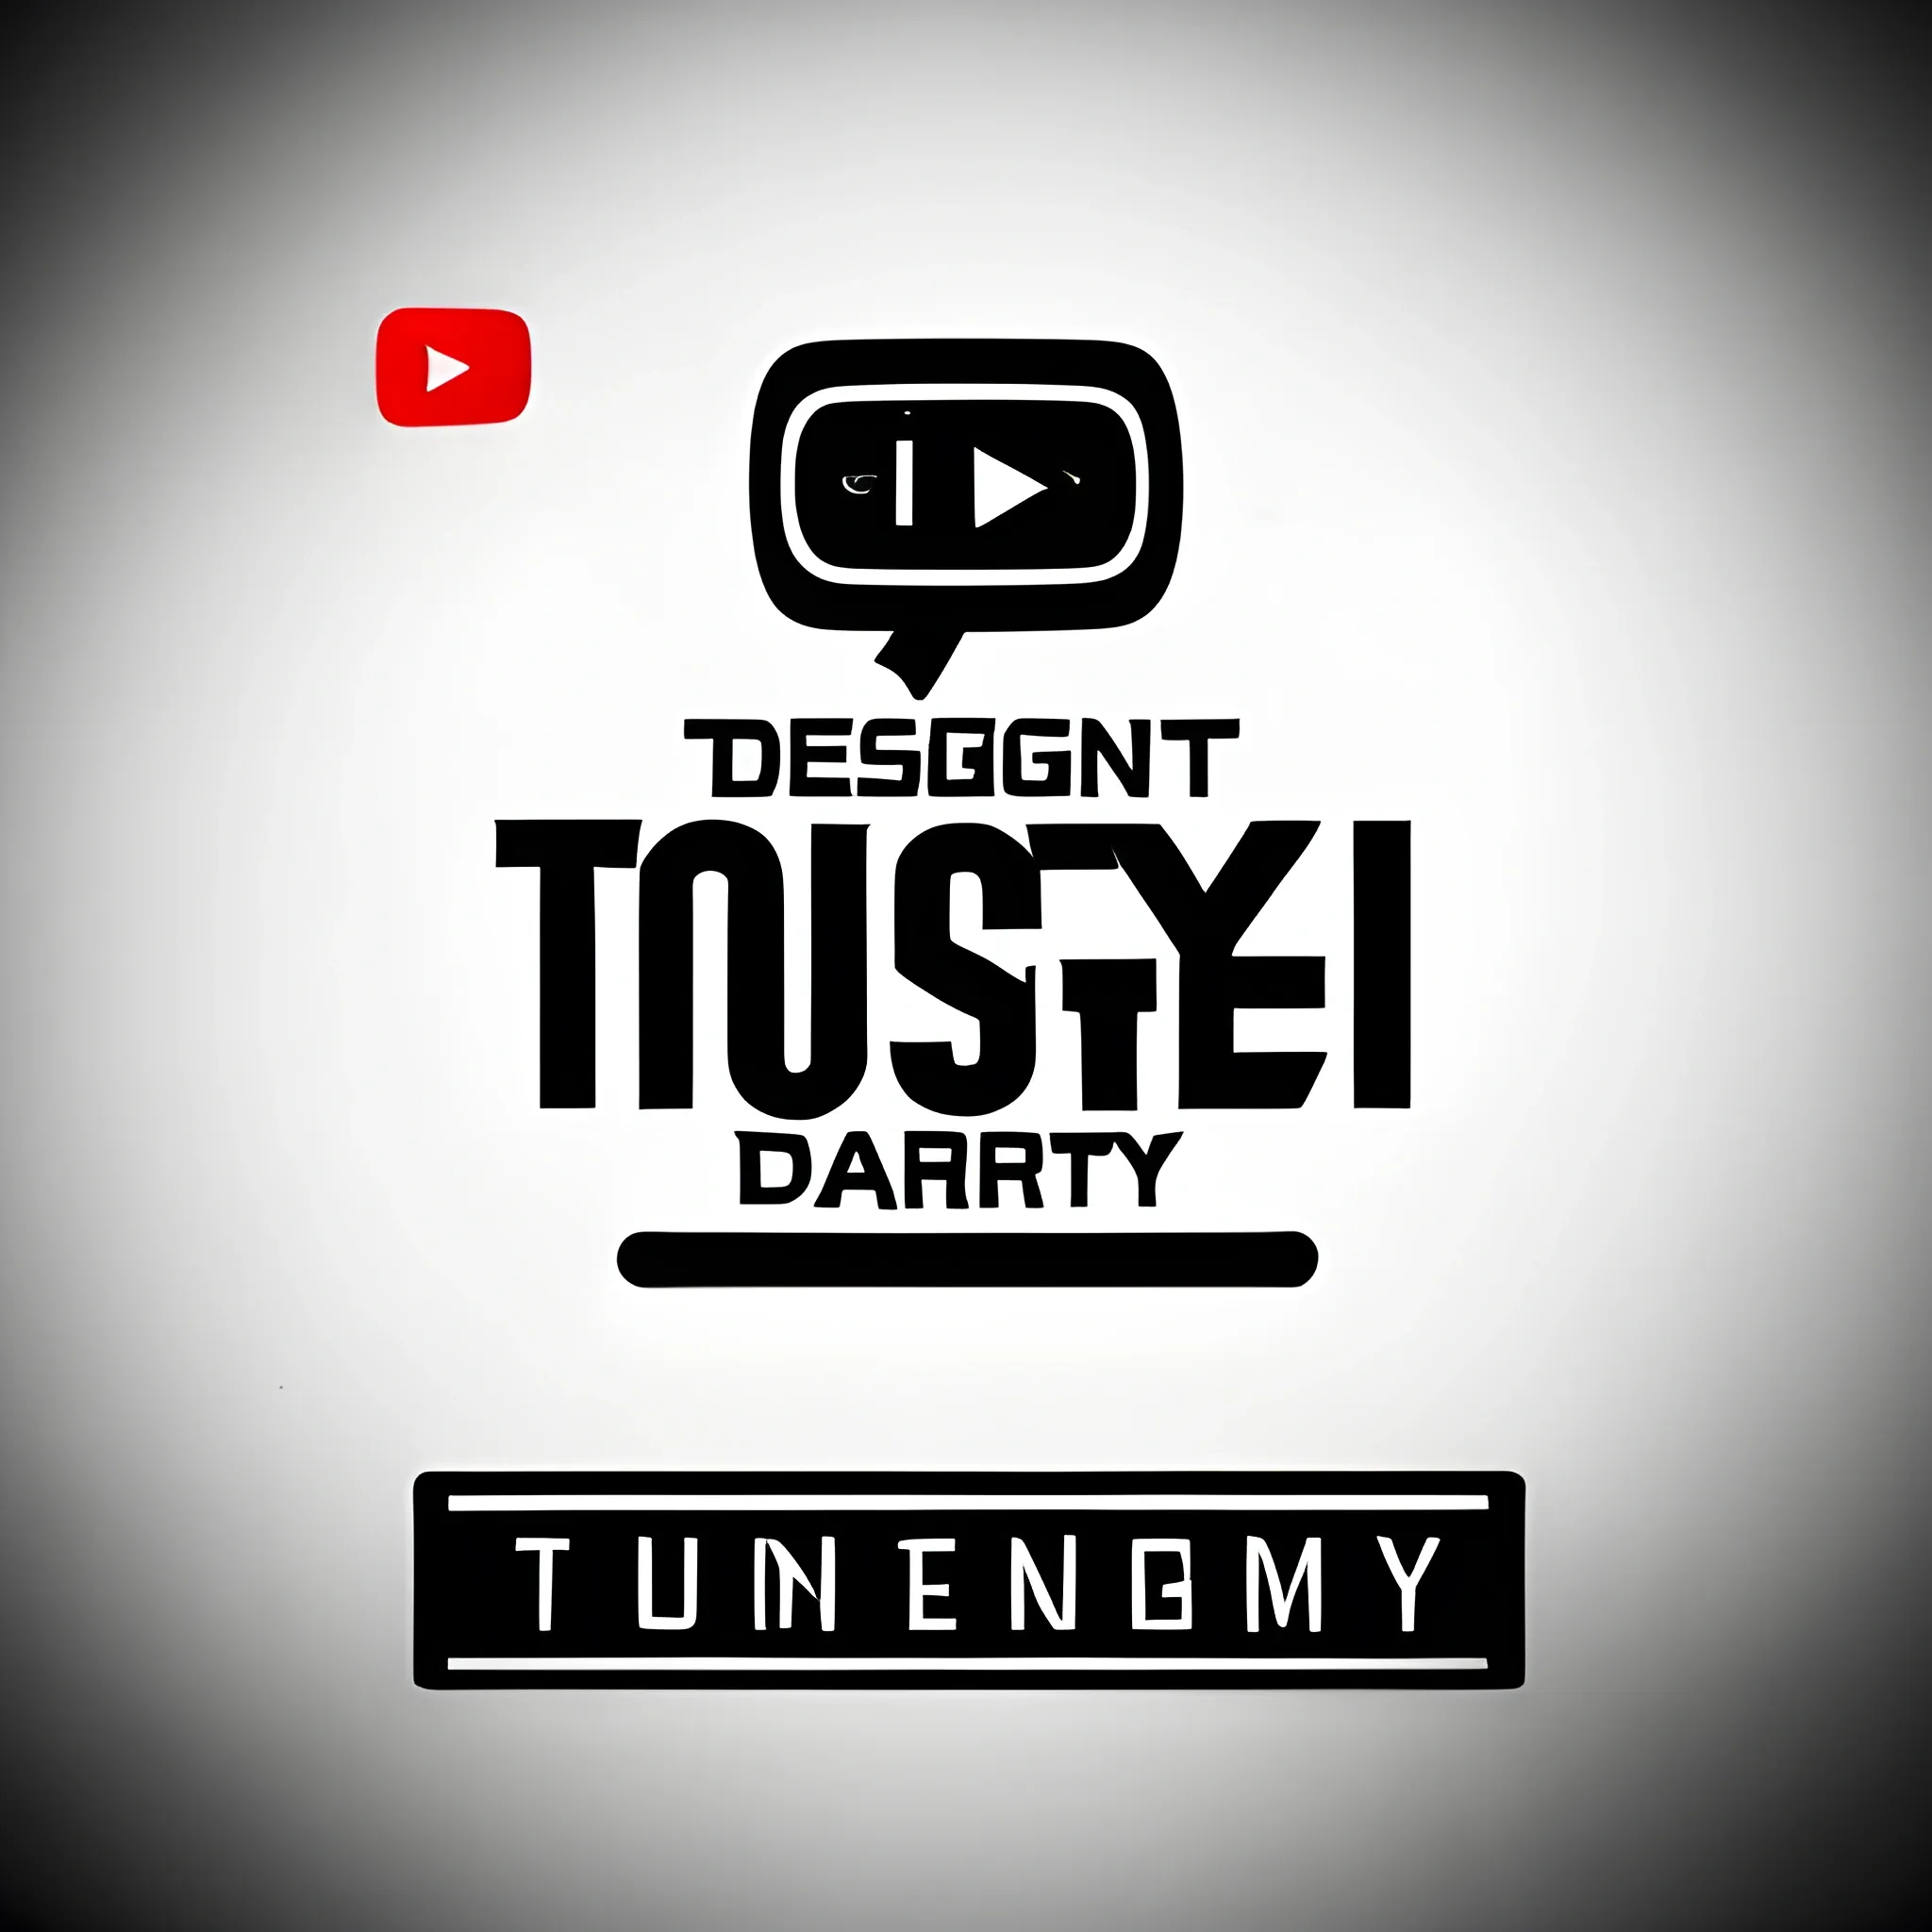 LOGO Channel YouTube "Design_armyofficial"